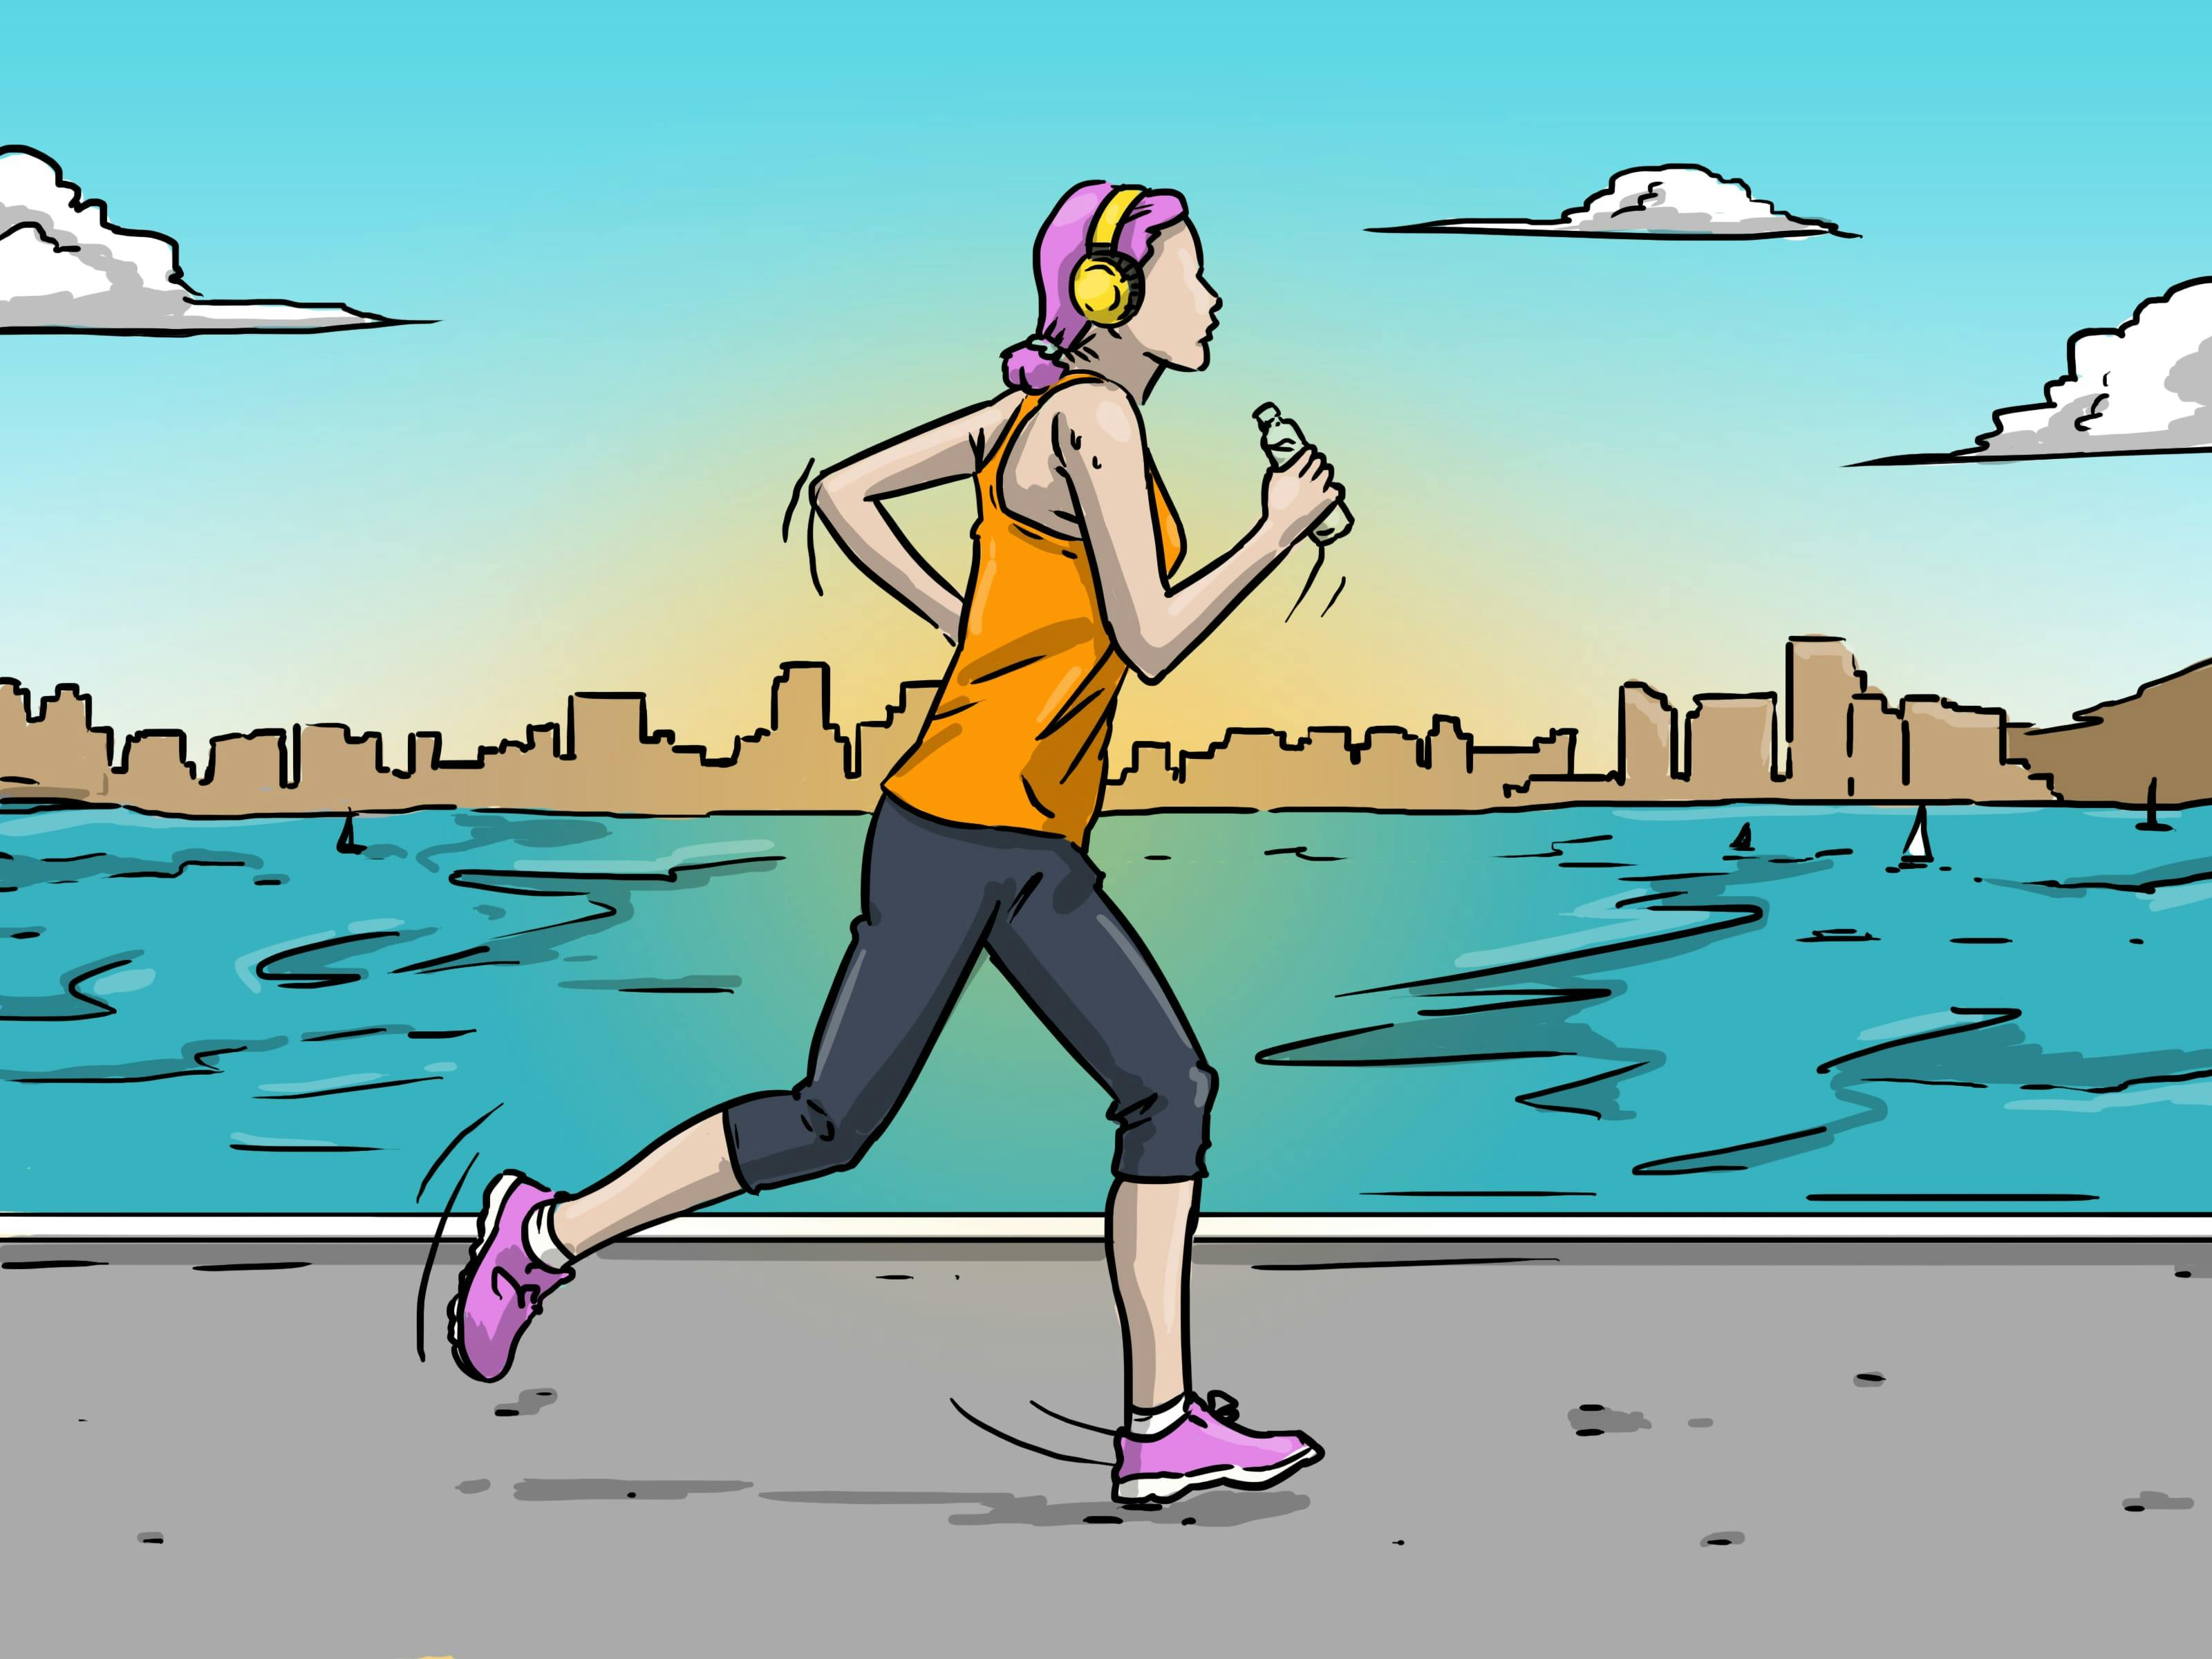 A woman takes a break from her work from home routine to go for a run, balancing the demands of her job and her personal well-being.